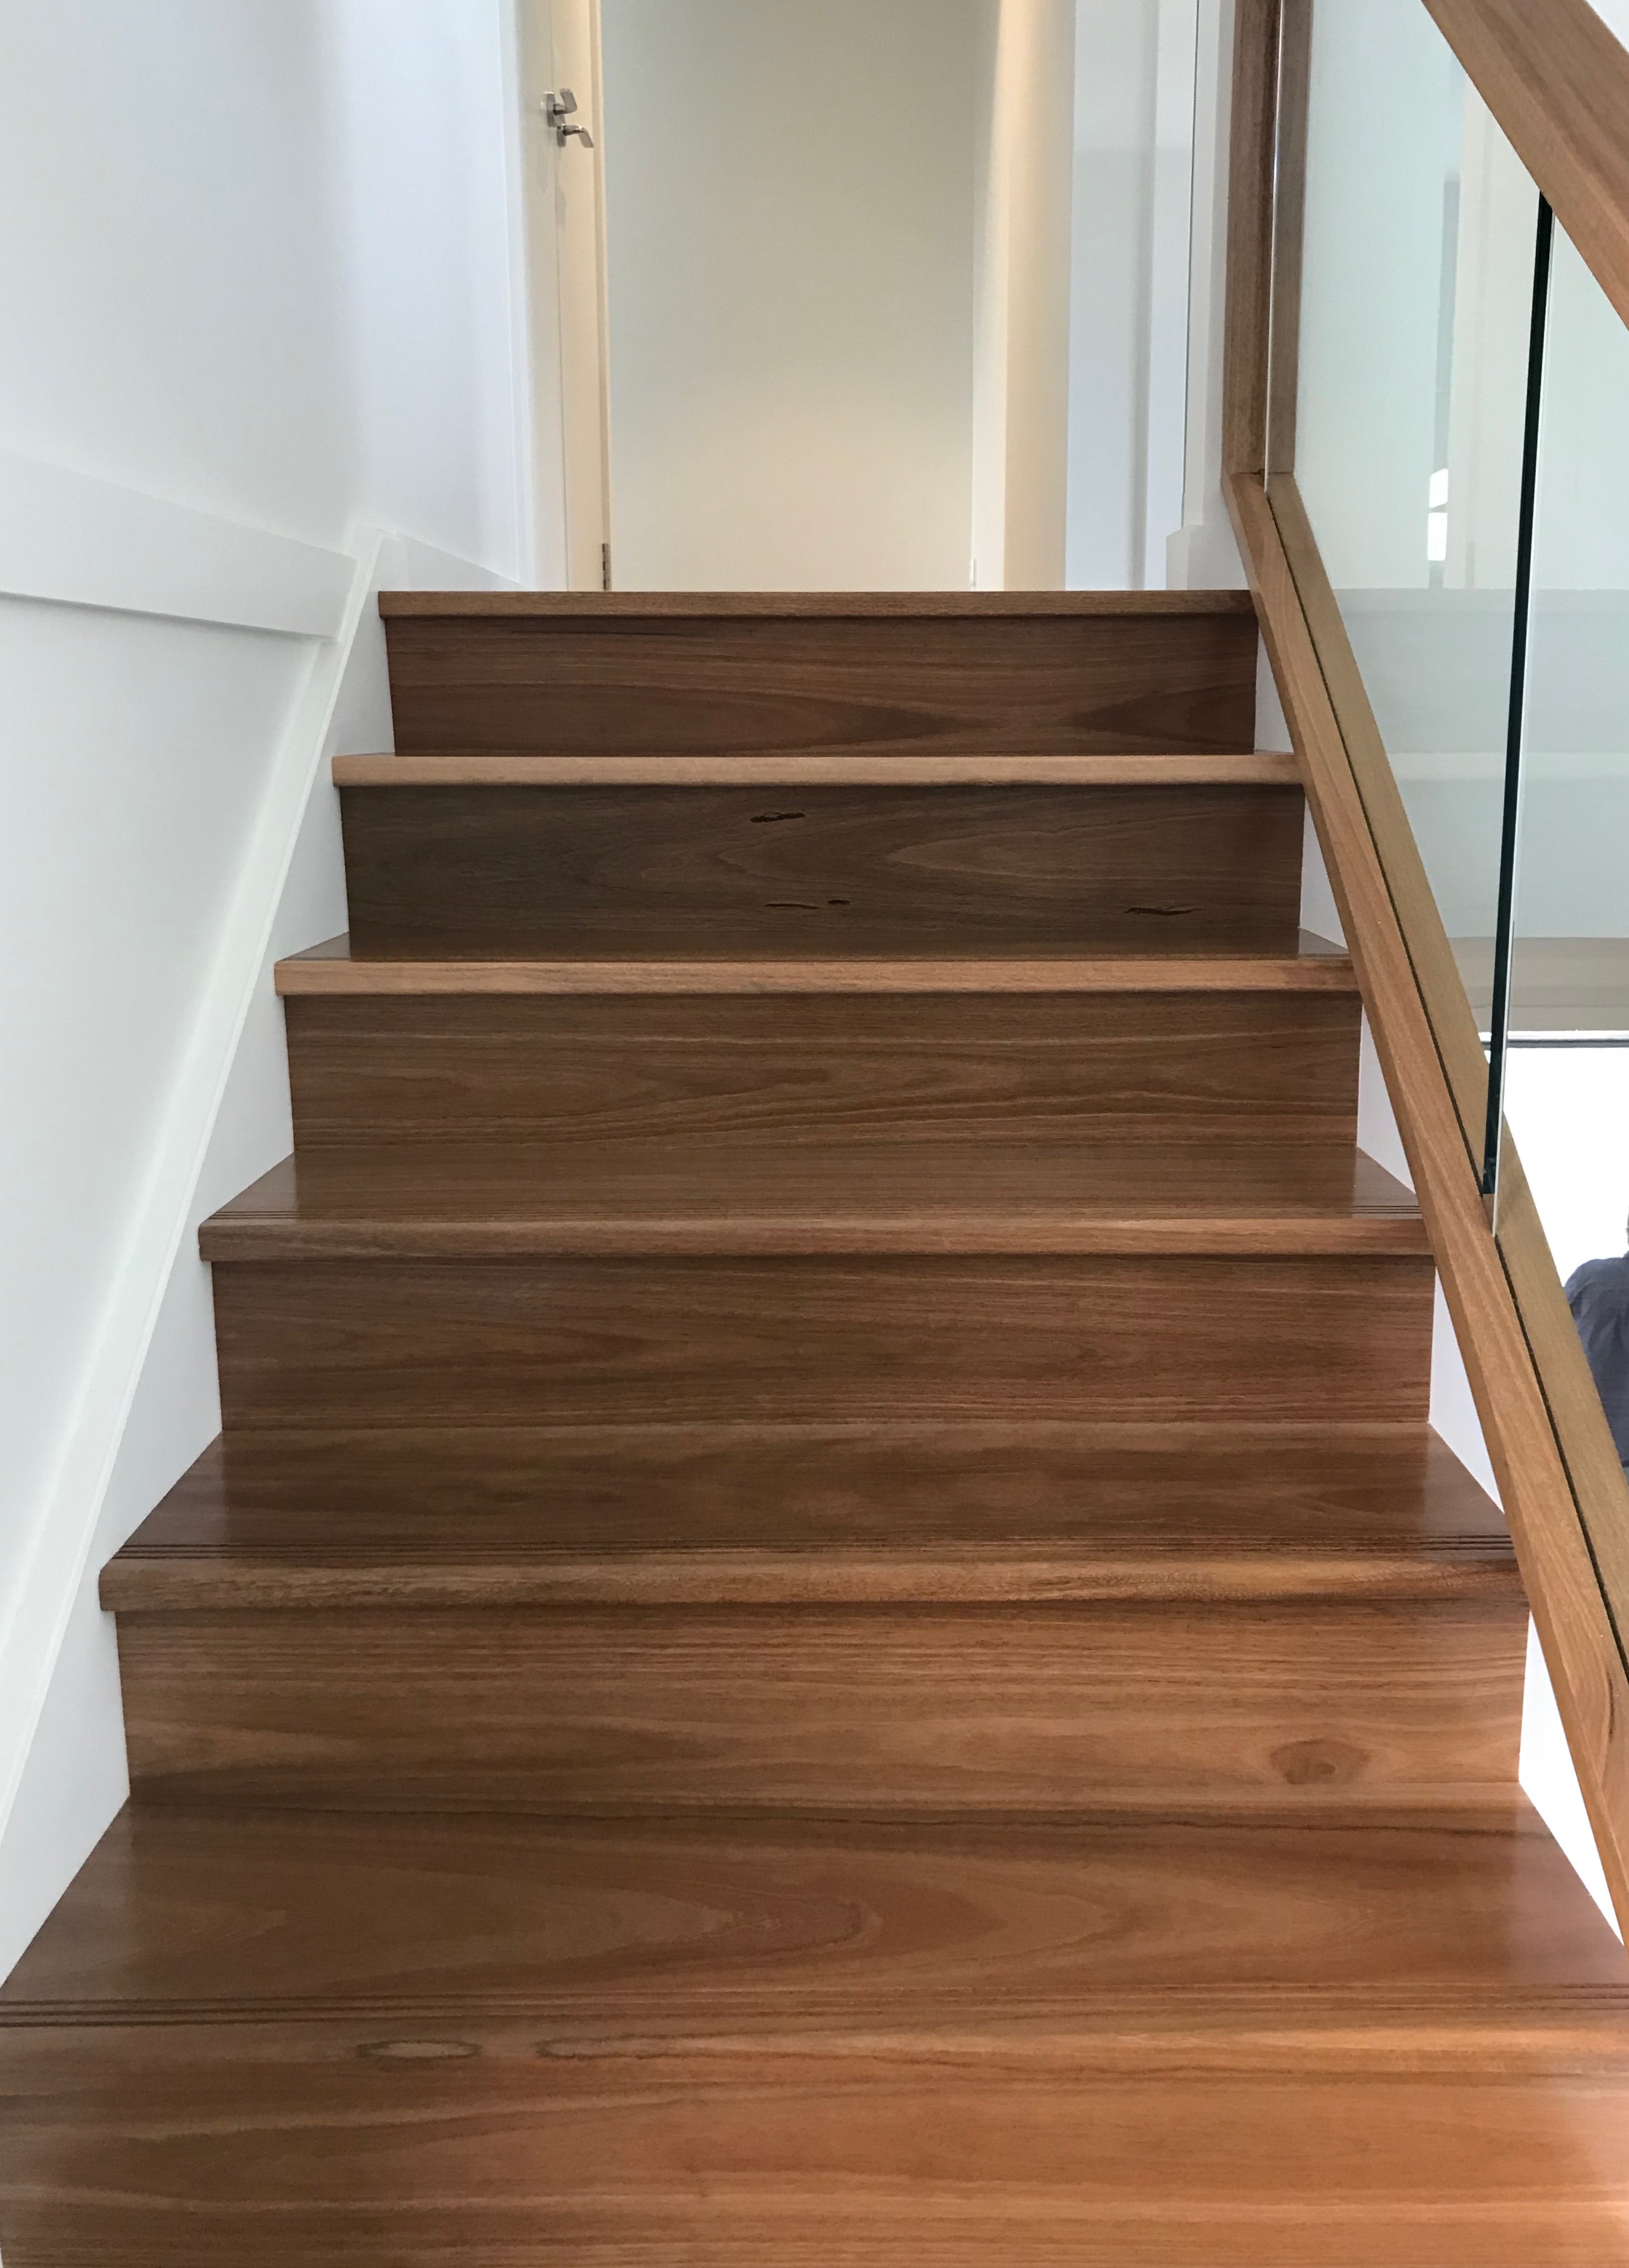 Hardwood & Timber Stairs Treads | Staircase Builders Sydney